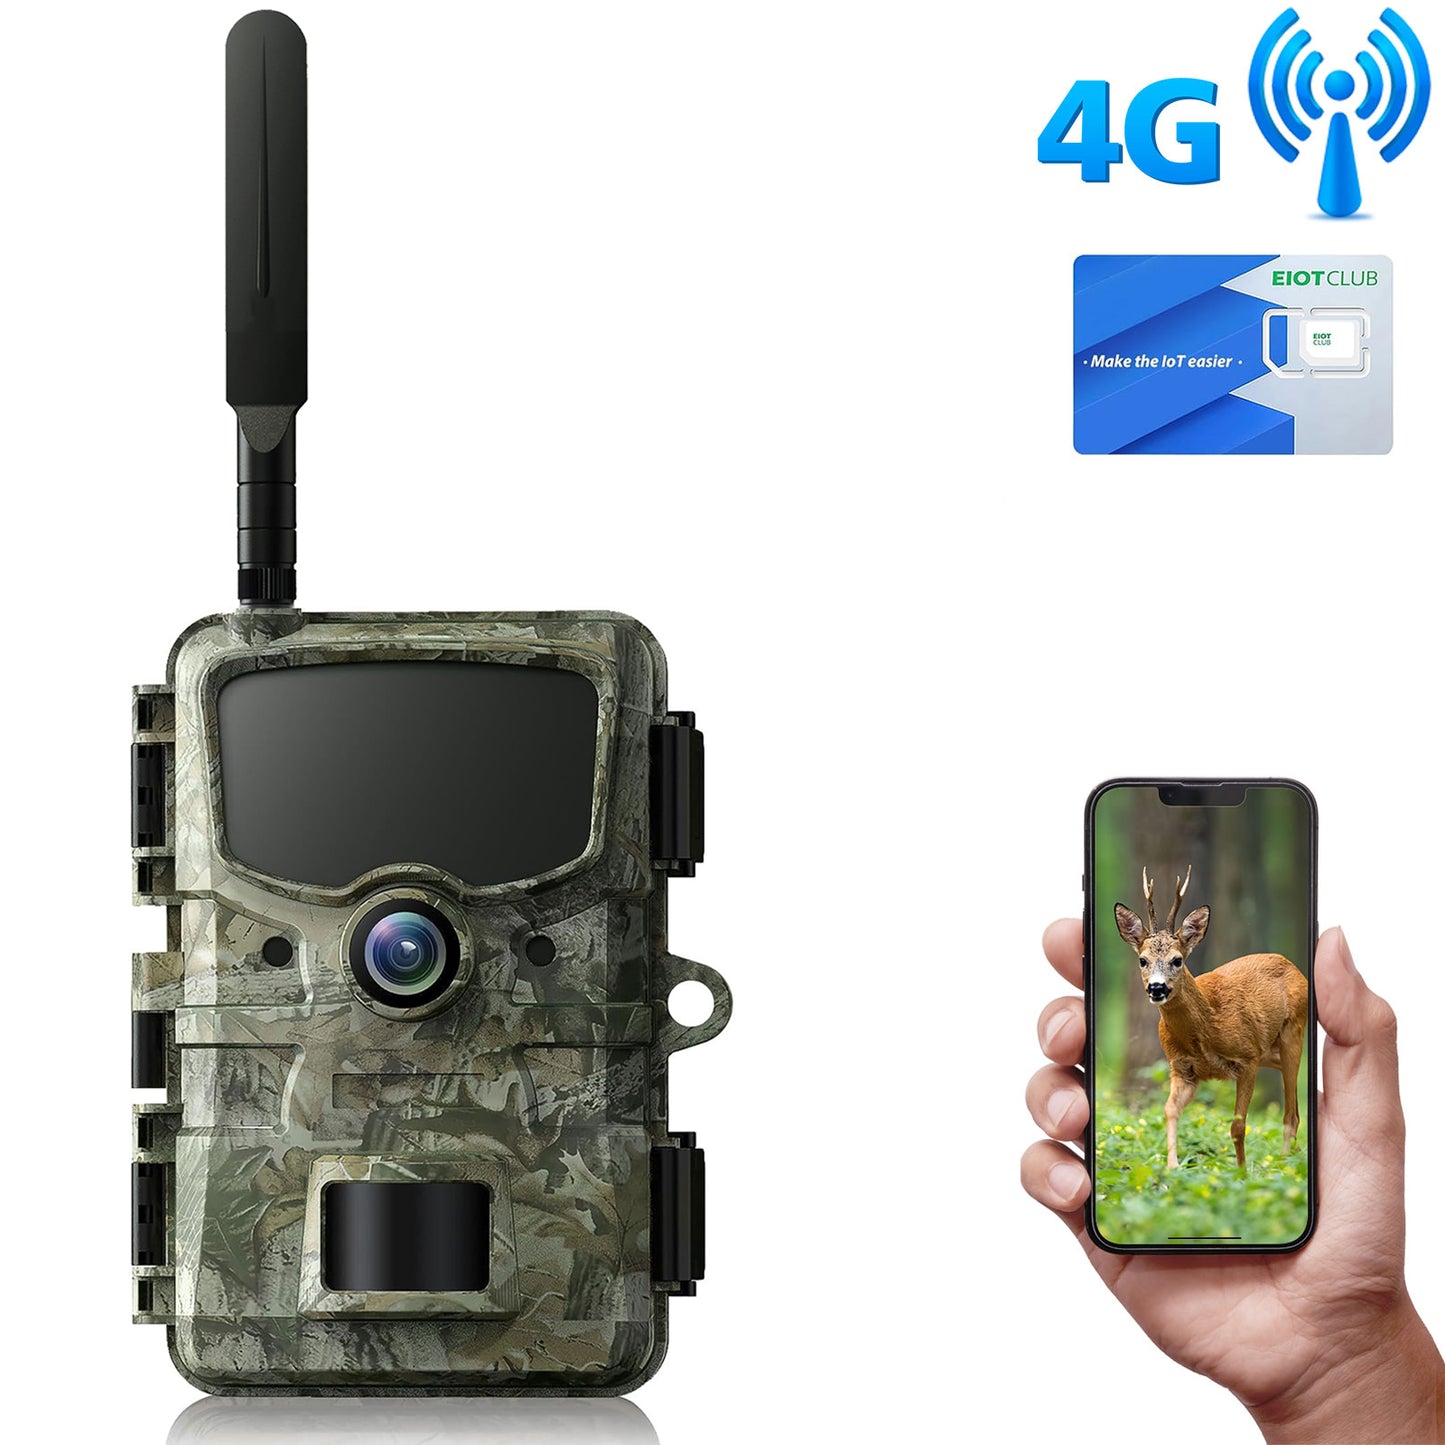 CAMPARK 4G LTE Cellular Trail Camera Sends Picture Video to Cell Phone - 24MP 1080P Game Hunting Camera with Night Vision Motion Activated Waterproof IP66 Trail Cam for Wildlife Monitoring